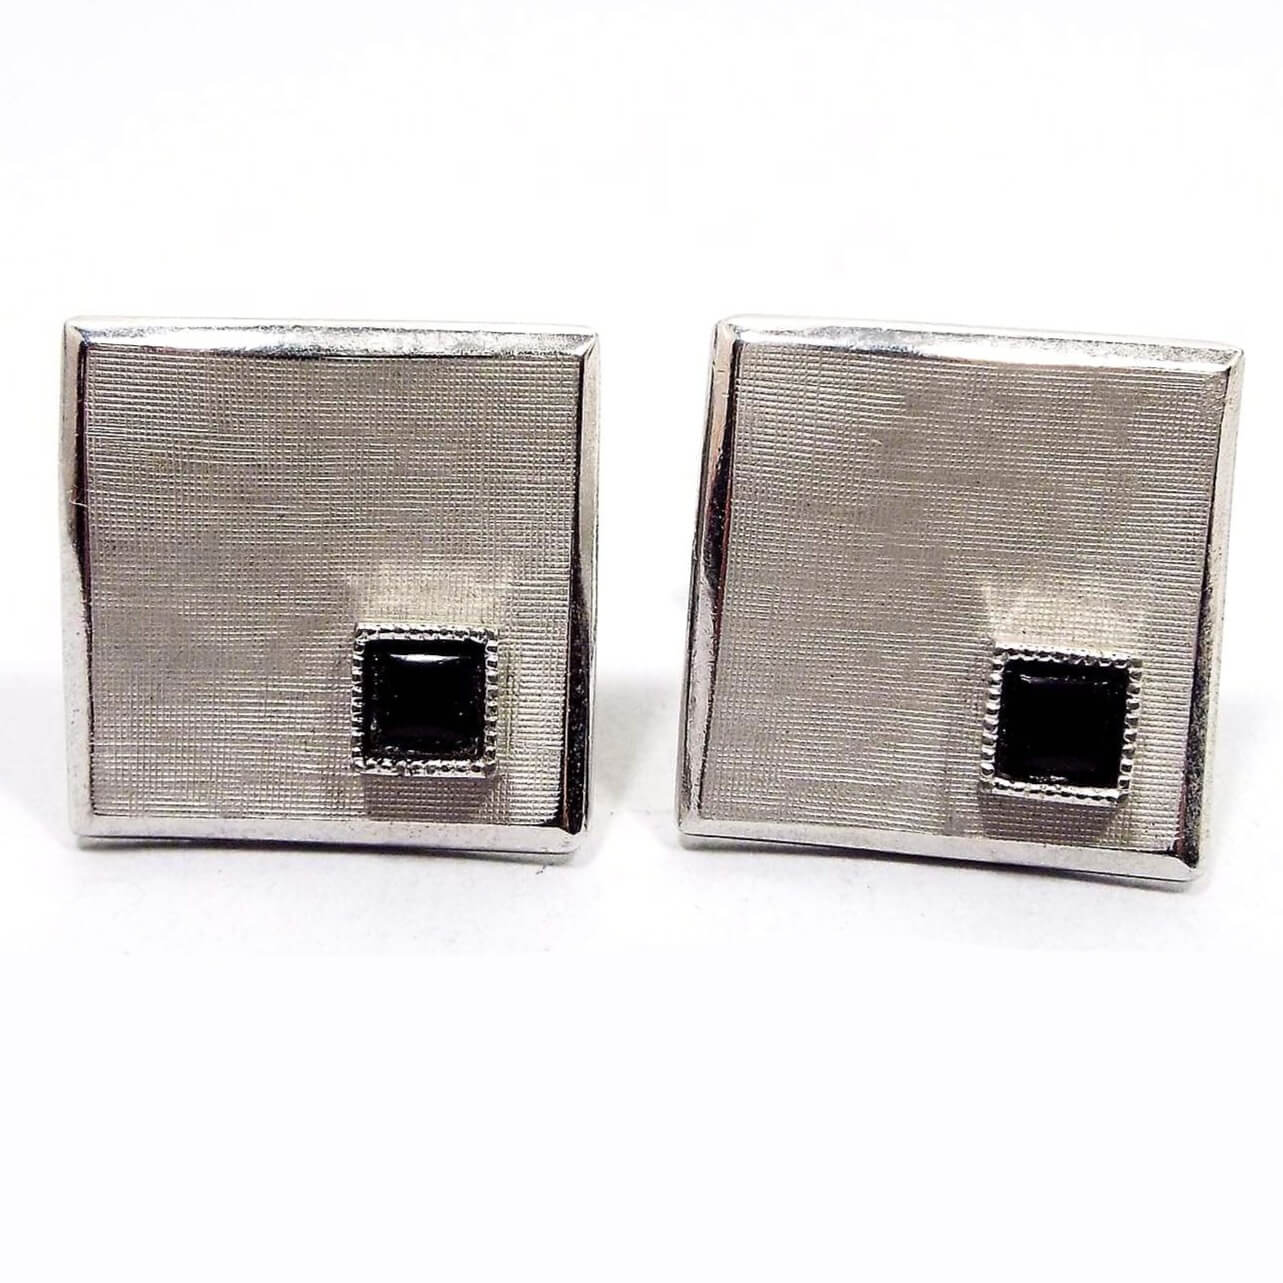 Front view of the Mid Century vintage Swank wavy cufflinks. They are brushed matte silver tone in color. There are small square black glass cabs on one corner. The cufflinks are square shaped but have an abstract wavy style design.